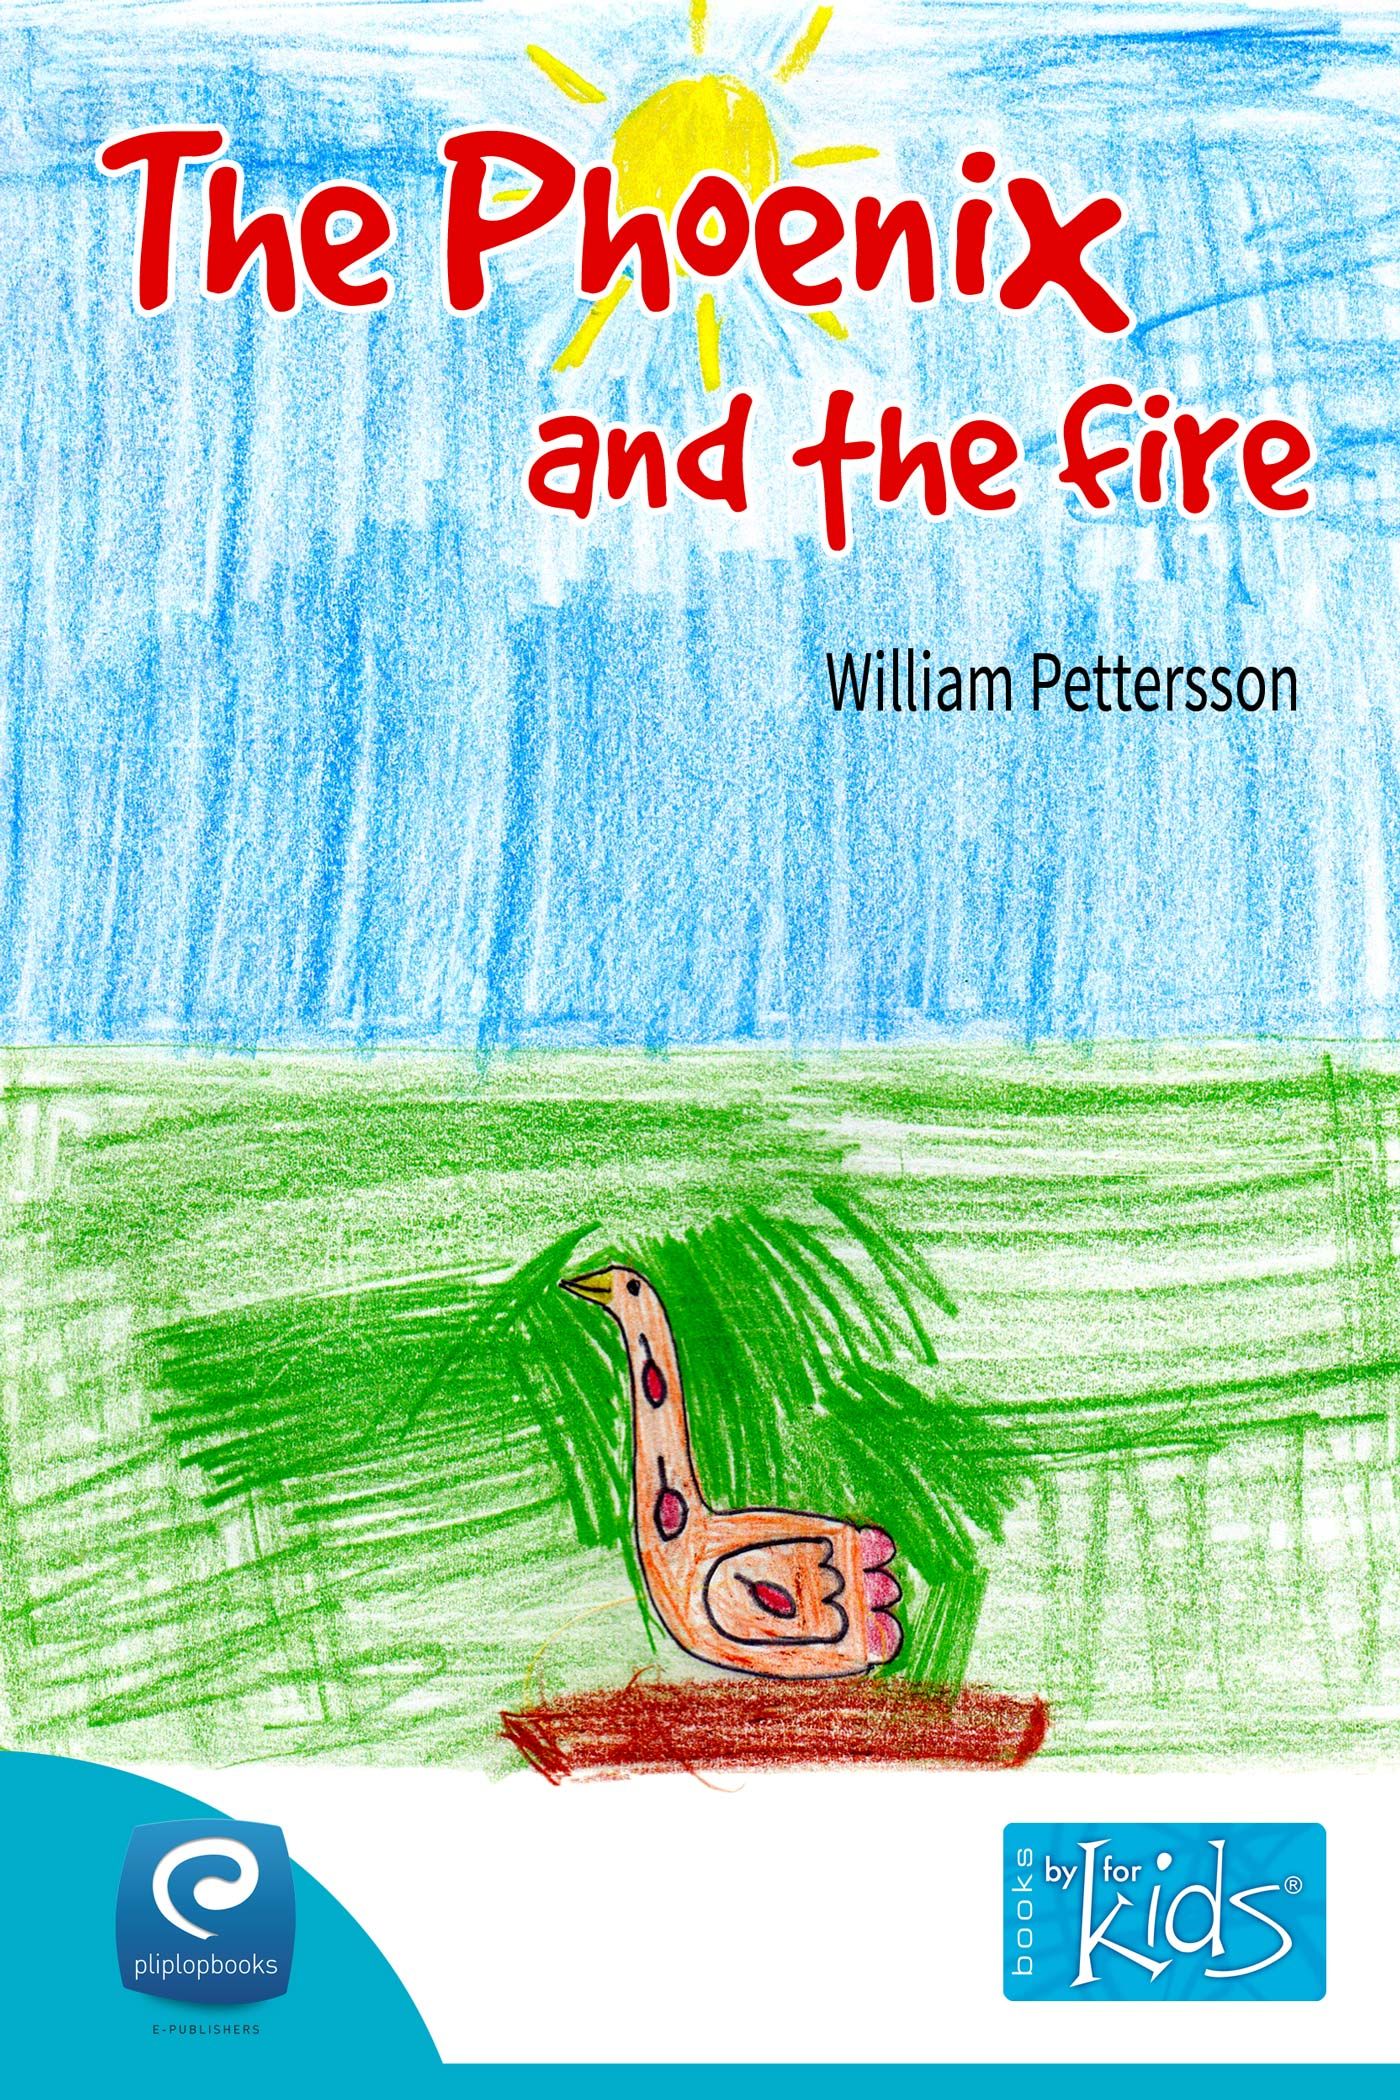 The phoenix and the fire, eBook by William Pettersson